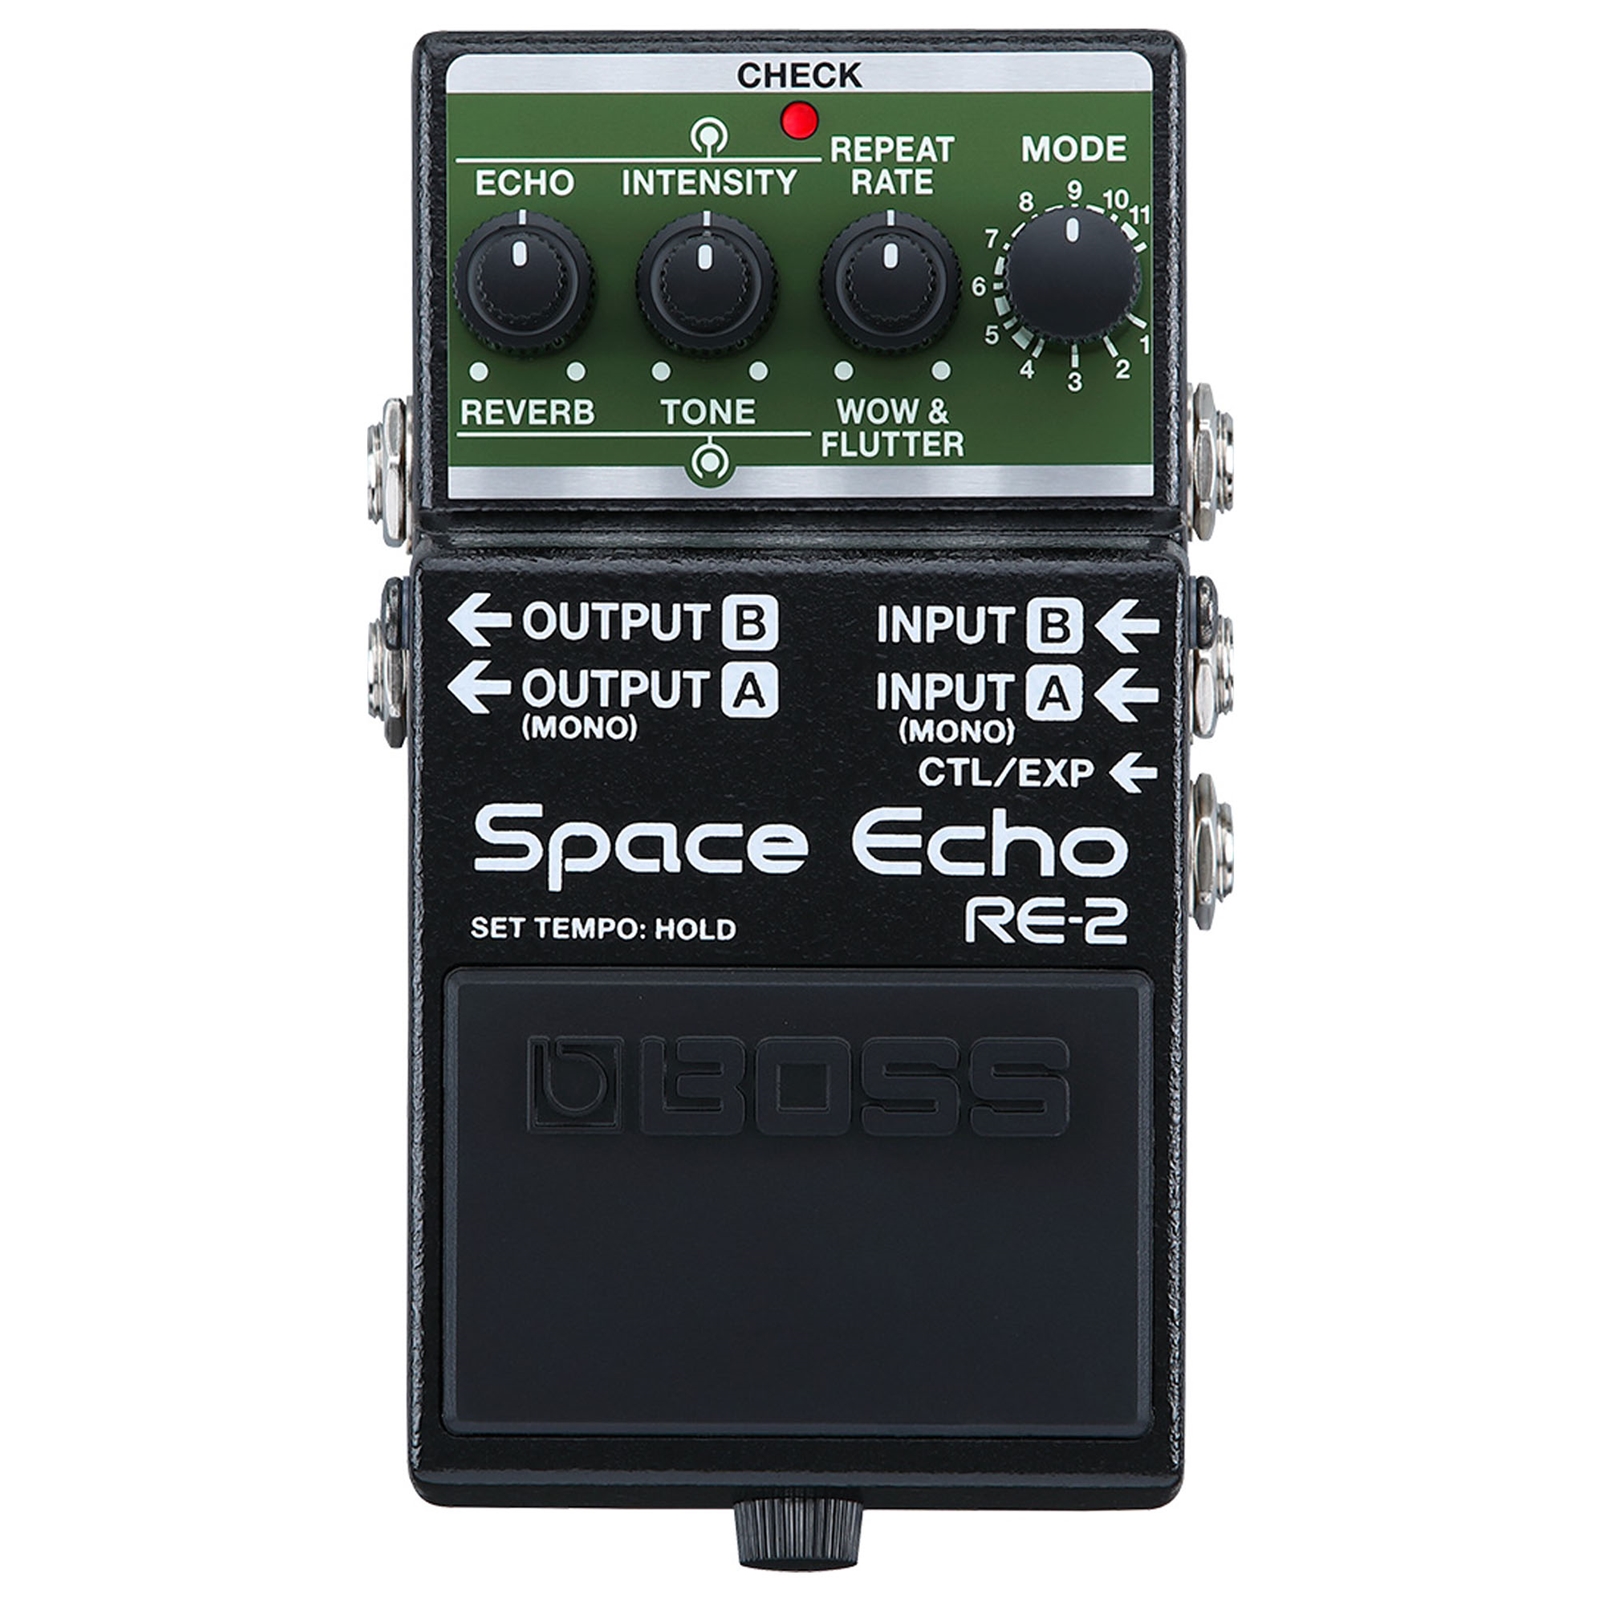 BOSS RE-2 Space Echo Delay Pedal